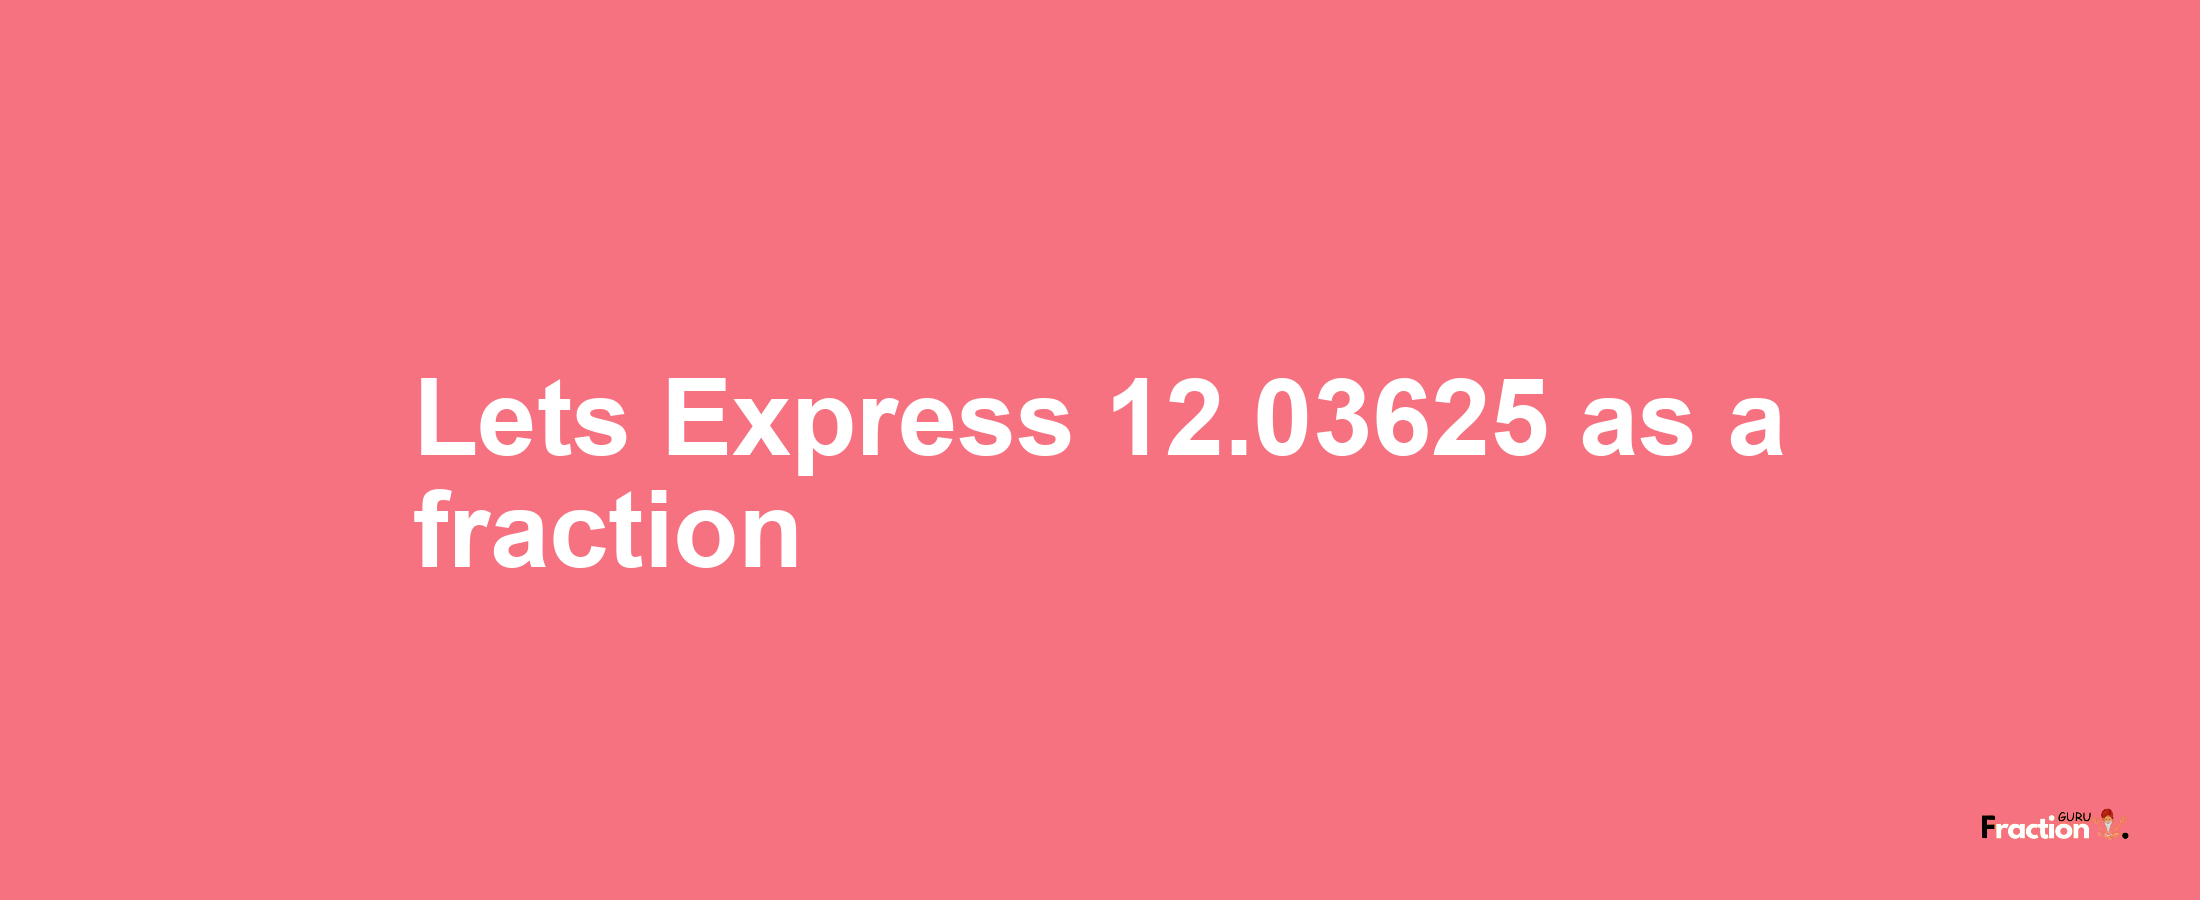 Lets Express 12.03625 as afraction